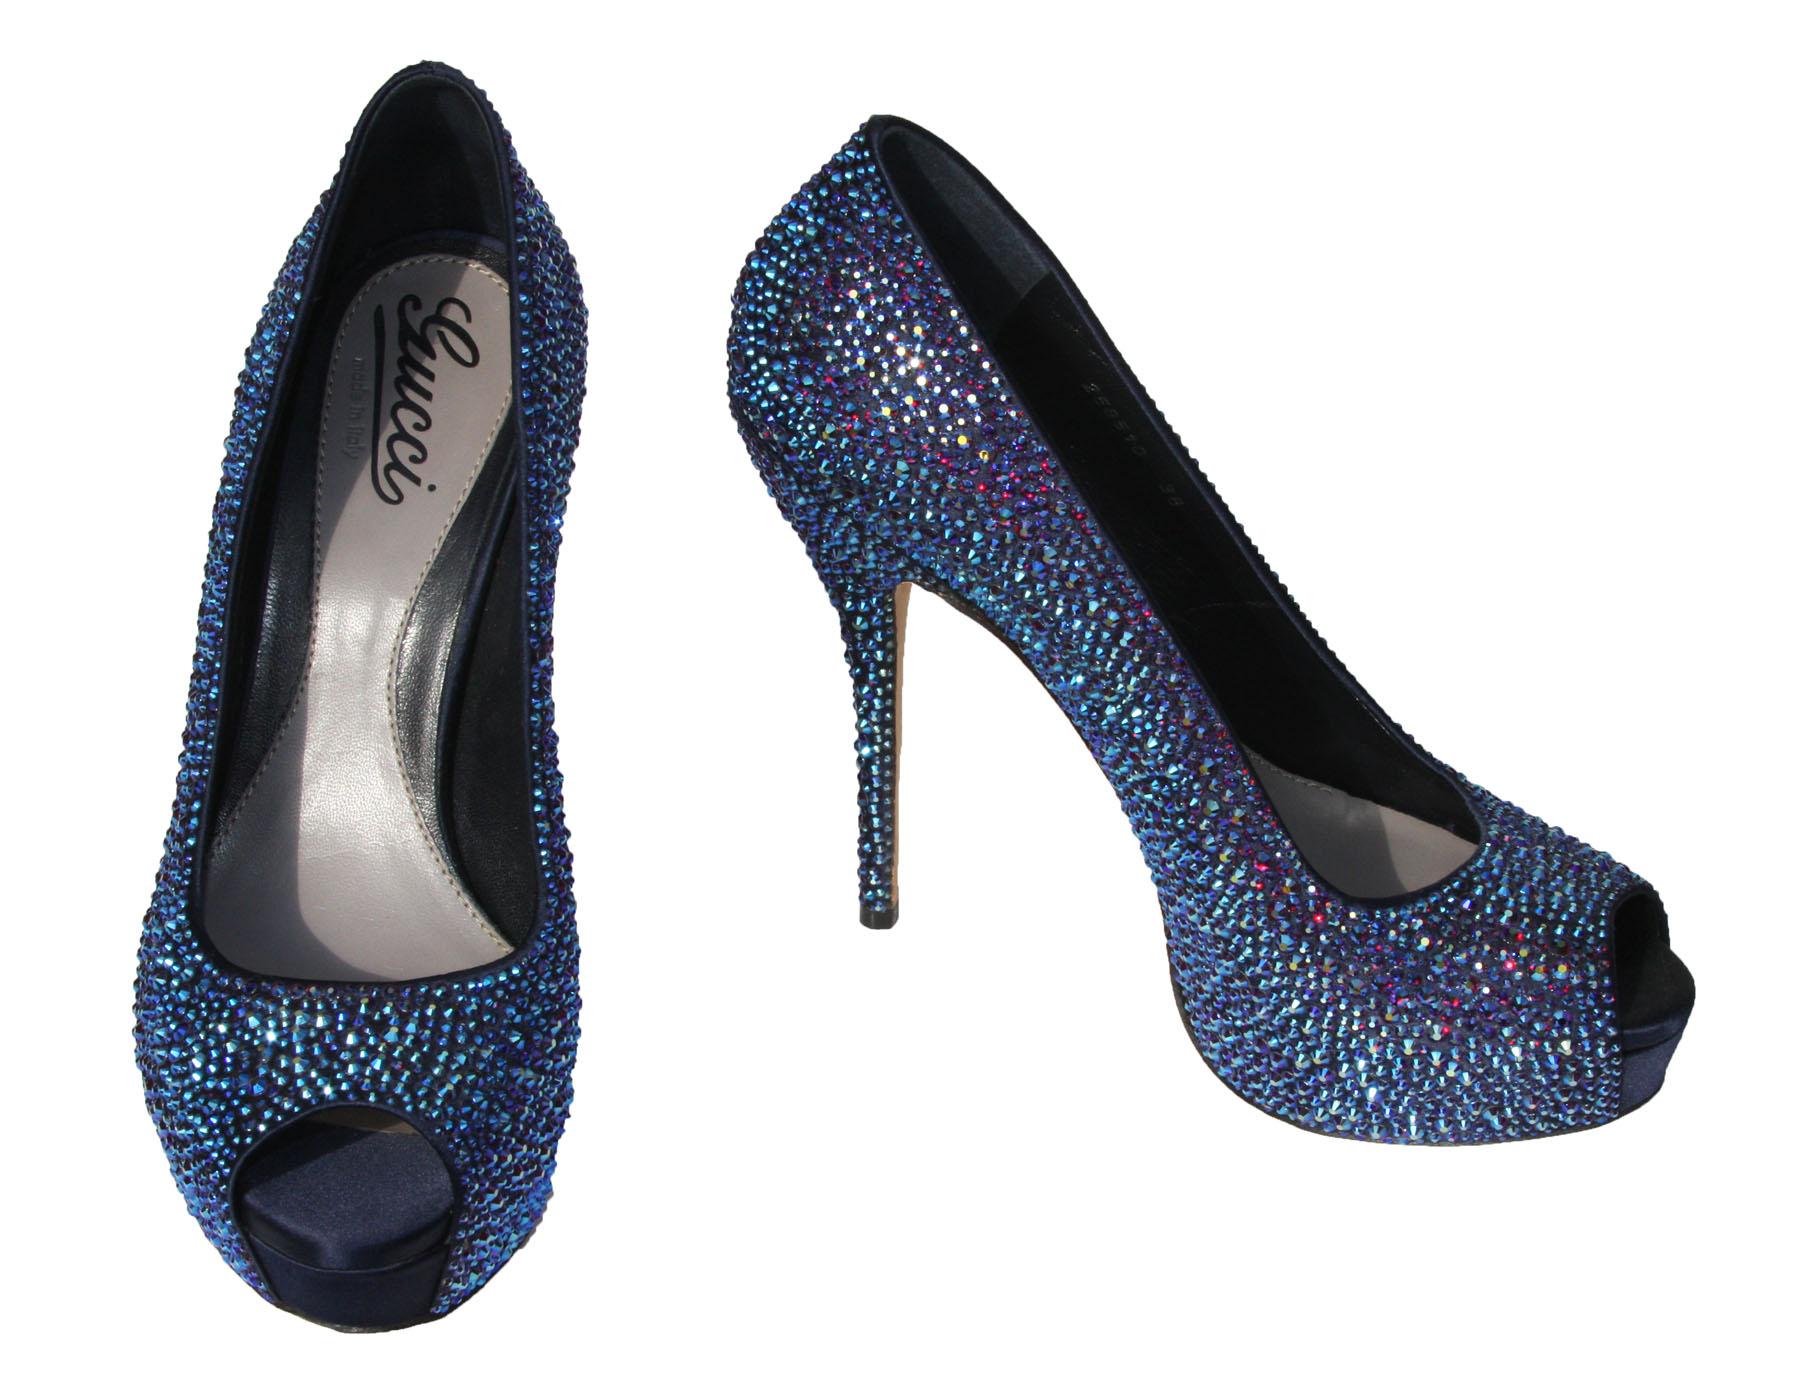 New $2, 295 Gucci Sofia Etoile Blue Crystal Encrusted Peep Toe High-Heel Pump 38 In New Condition For Sale In Montgomery, TX